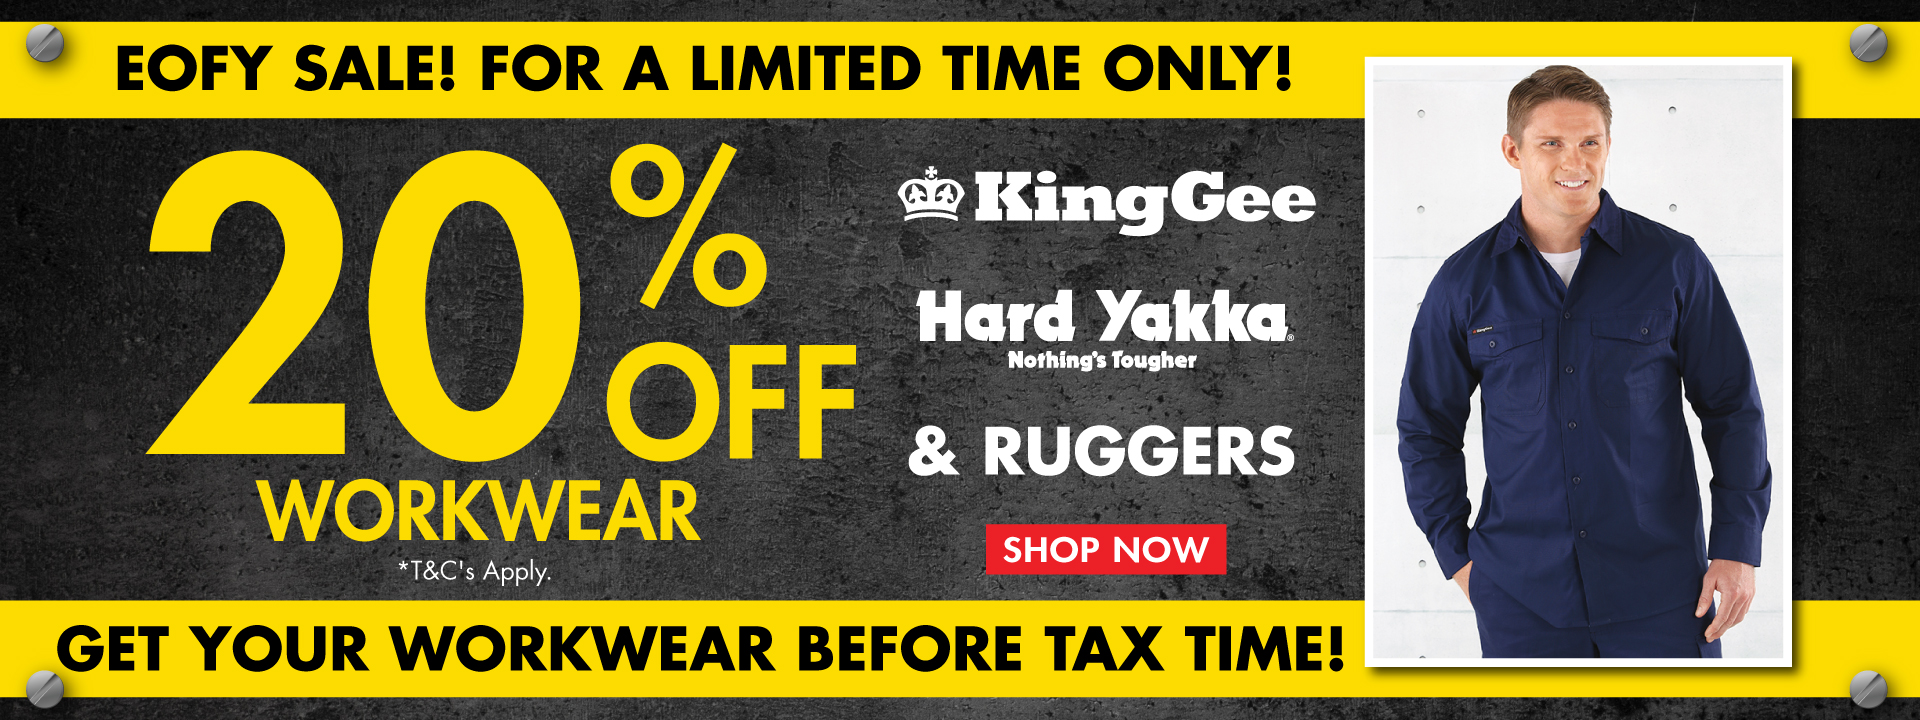 20% OFF King Gee, Hard Yakka and Ruggers at Lowes